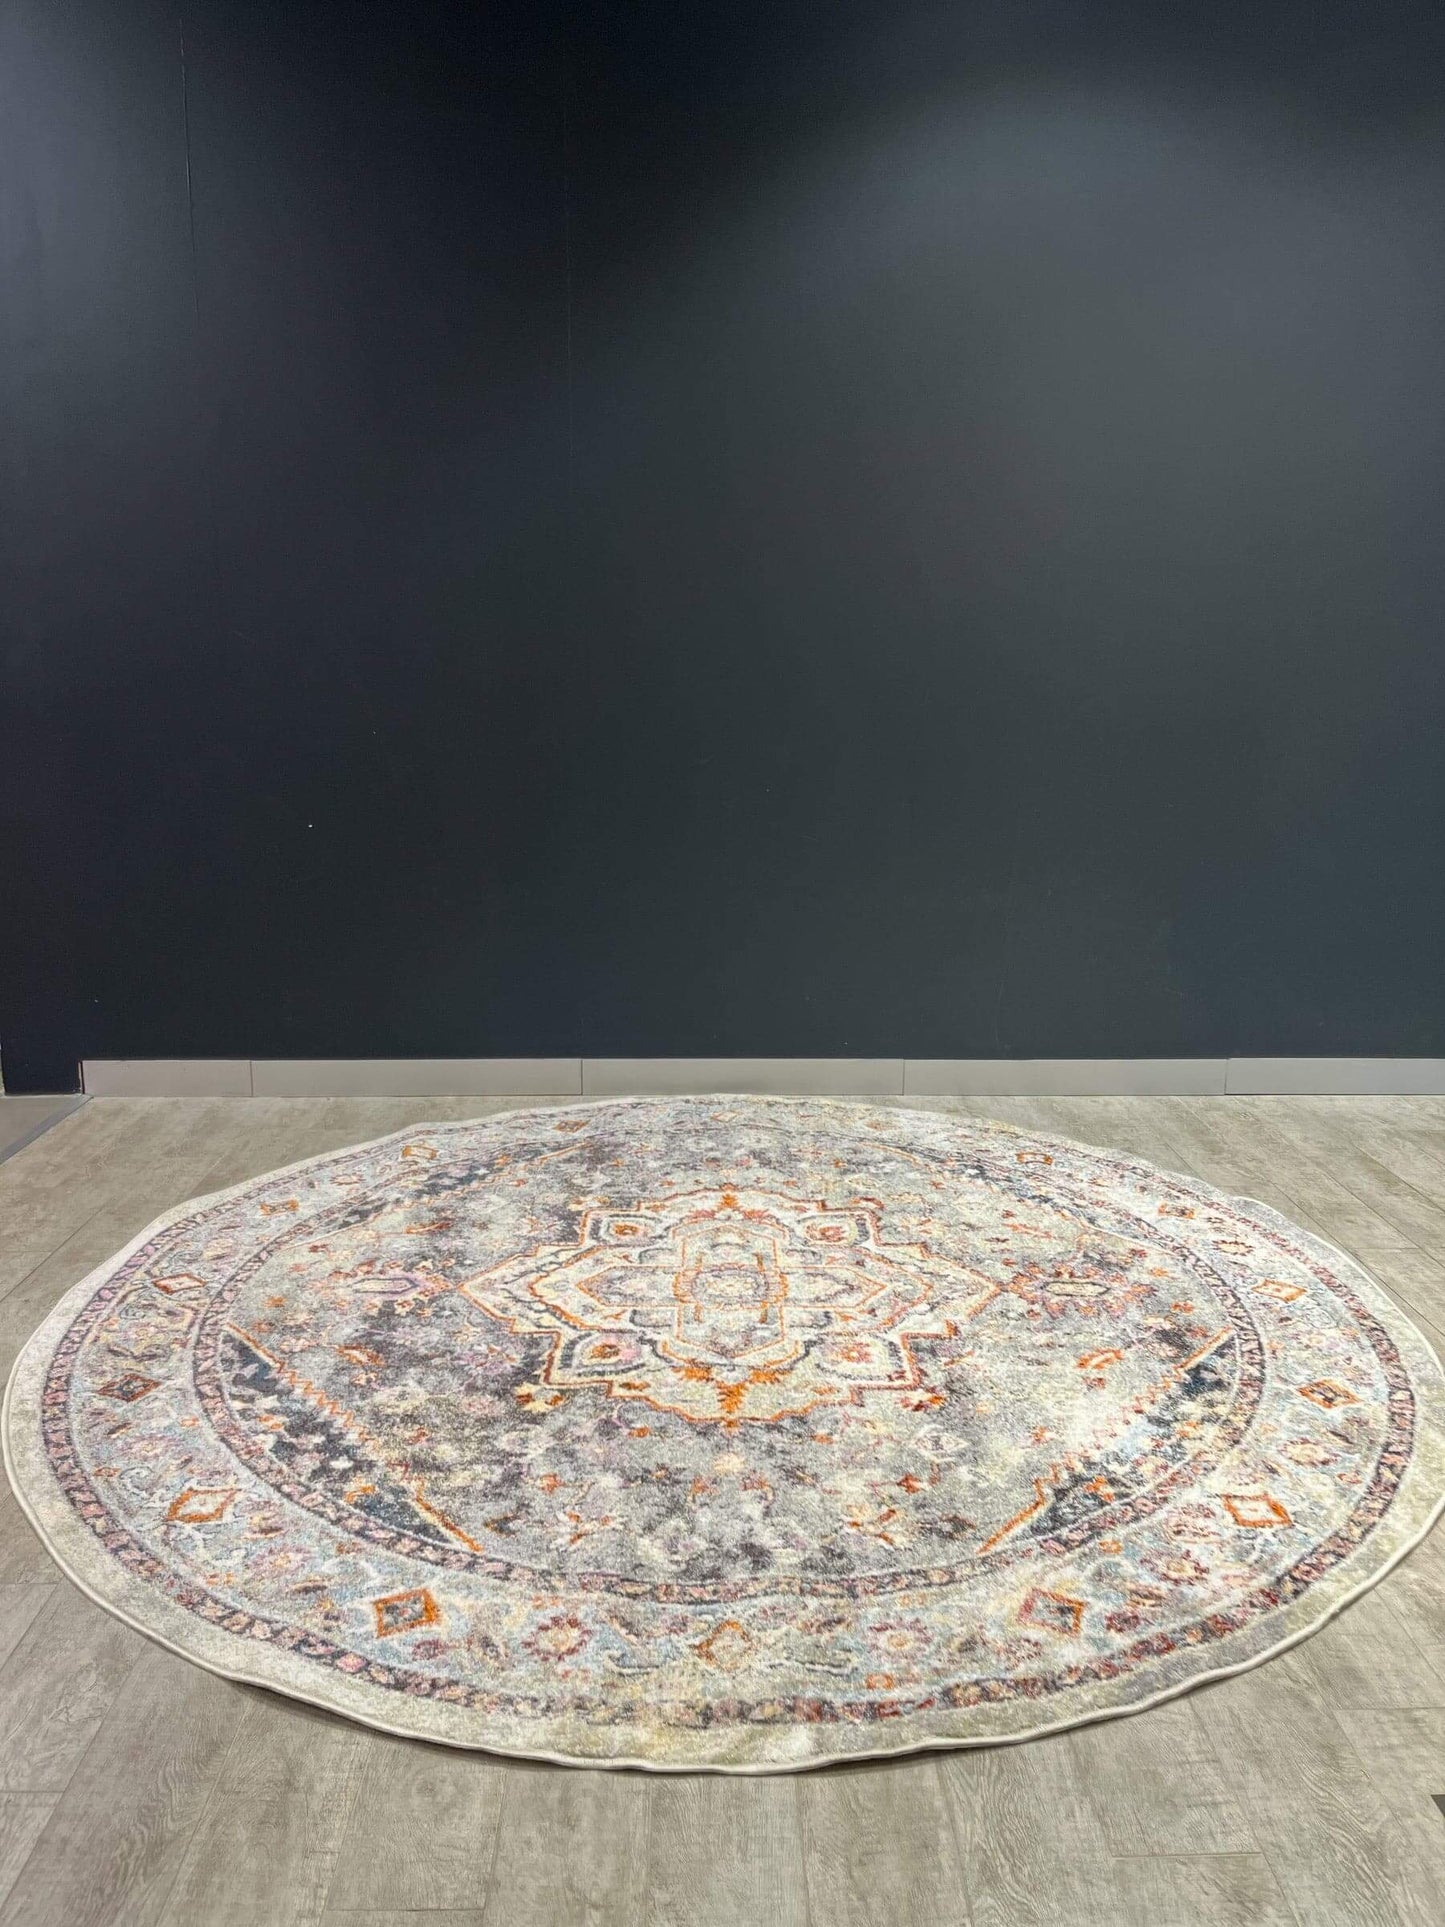 Huge Clearance, Large Round Rugs on Sale These high-quality Turkish rugs come in large rounds, perfect for any room in your home. Enjoy a discounted price on these sale rugs, making them a great value you won't want to miss!$349.00Large Round Sale Rugs 24